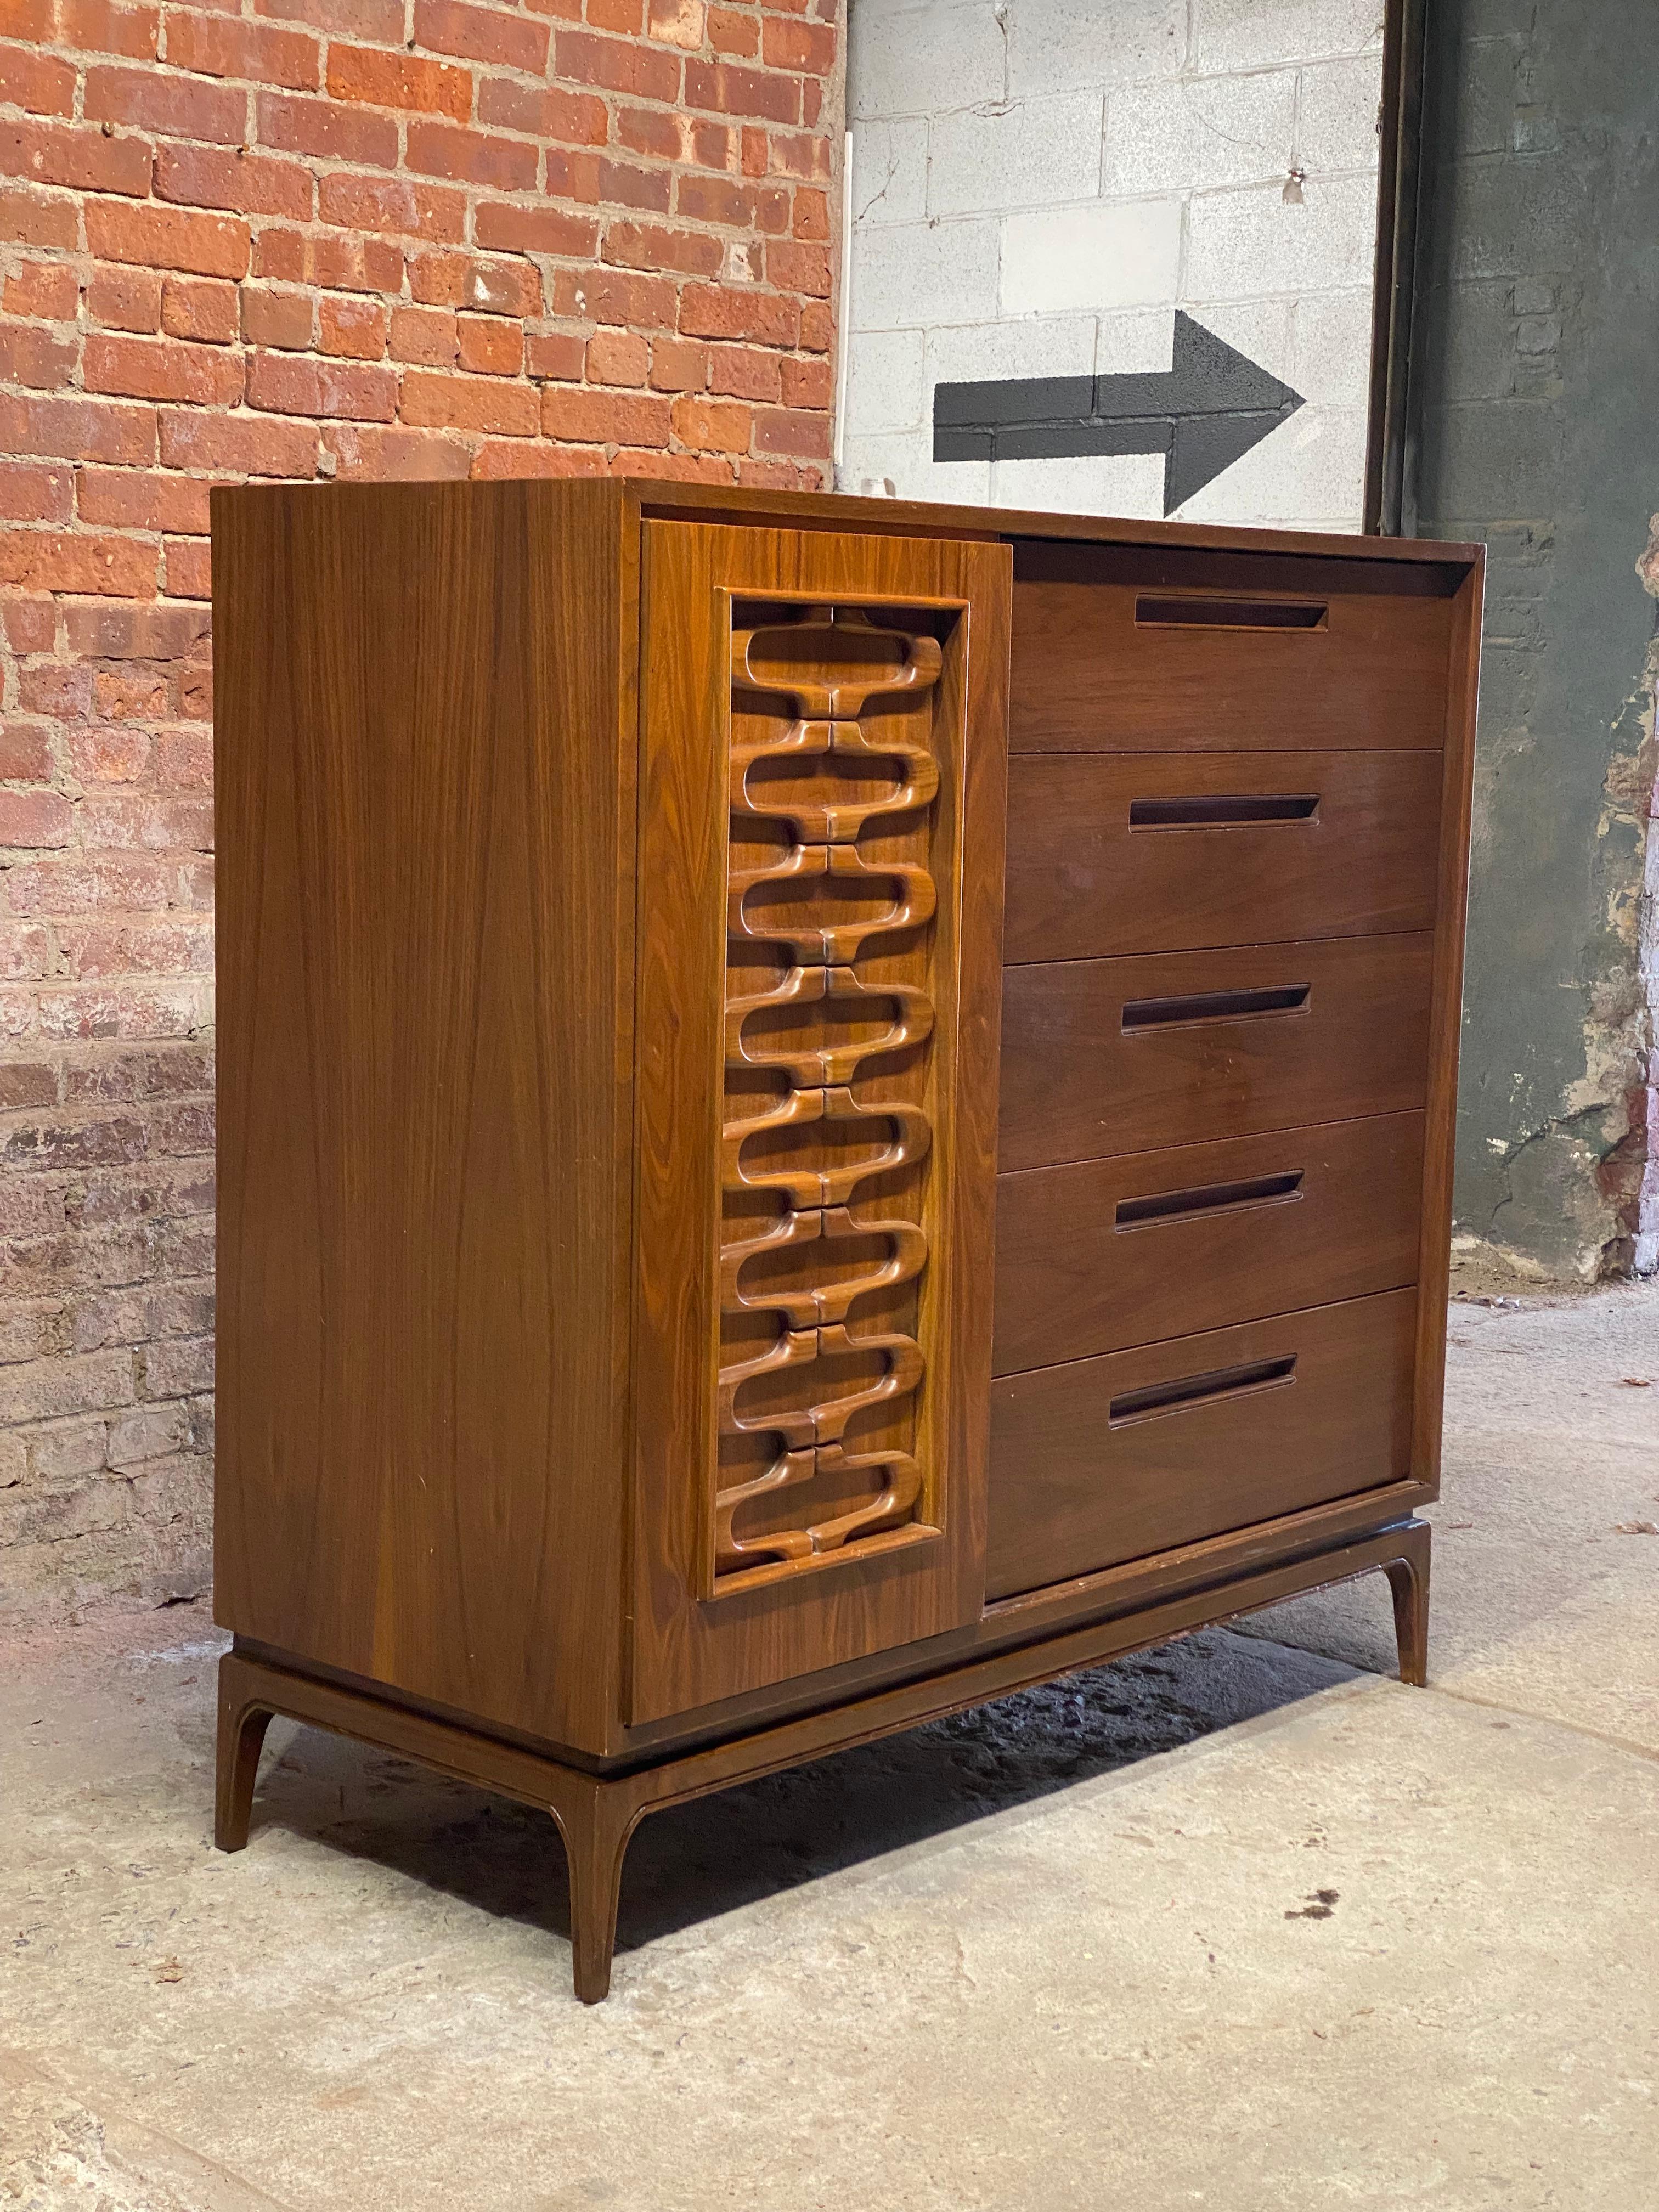 Exceptional tall walnut dresser. Circa 1960. Five by five drawer design, tapered flared legs, sliding door with a wonderful abstract design. Pieces of this size and design were often referred to as gentleman's dresser when part of a larger bedroom